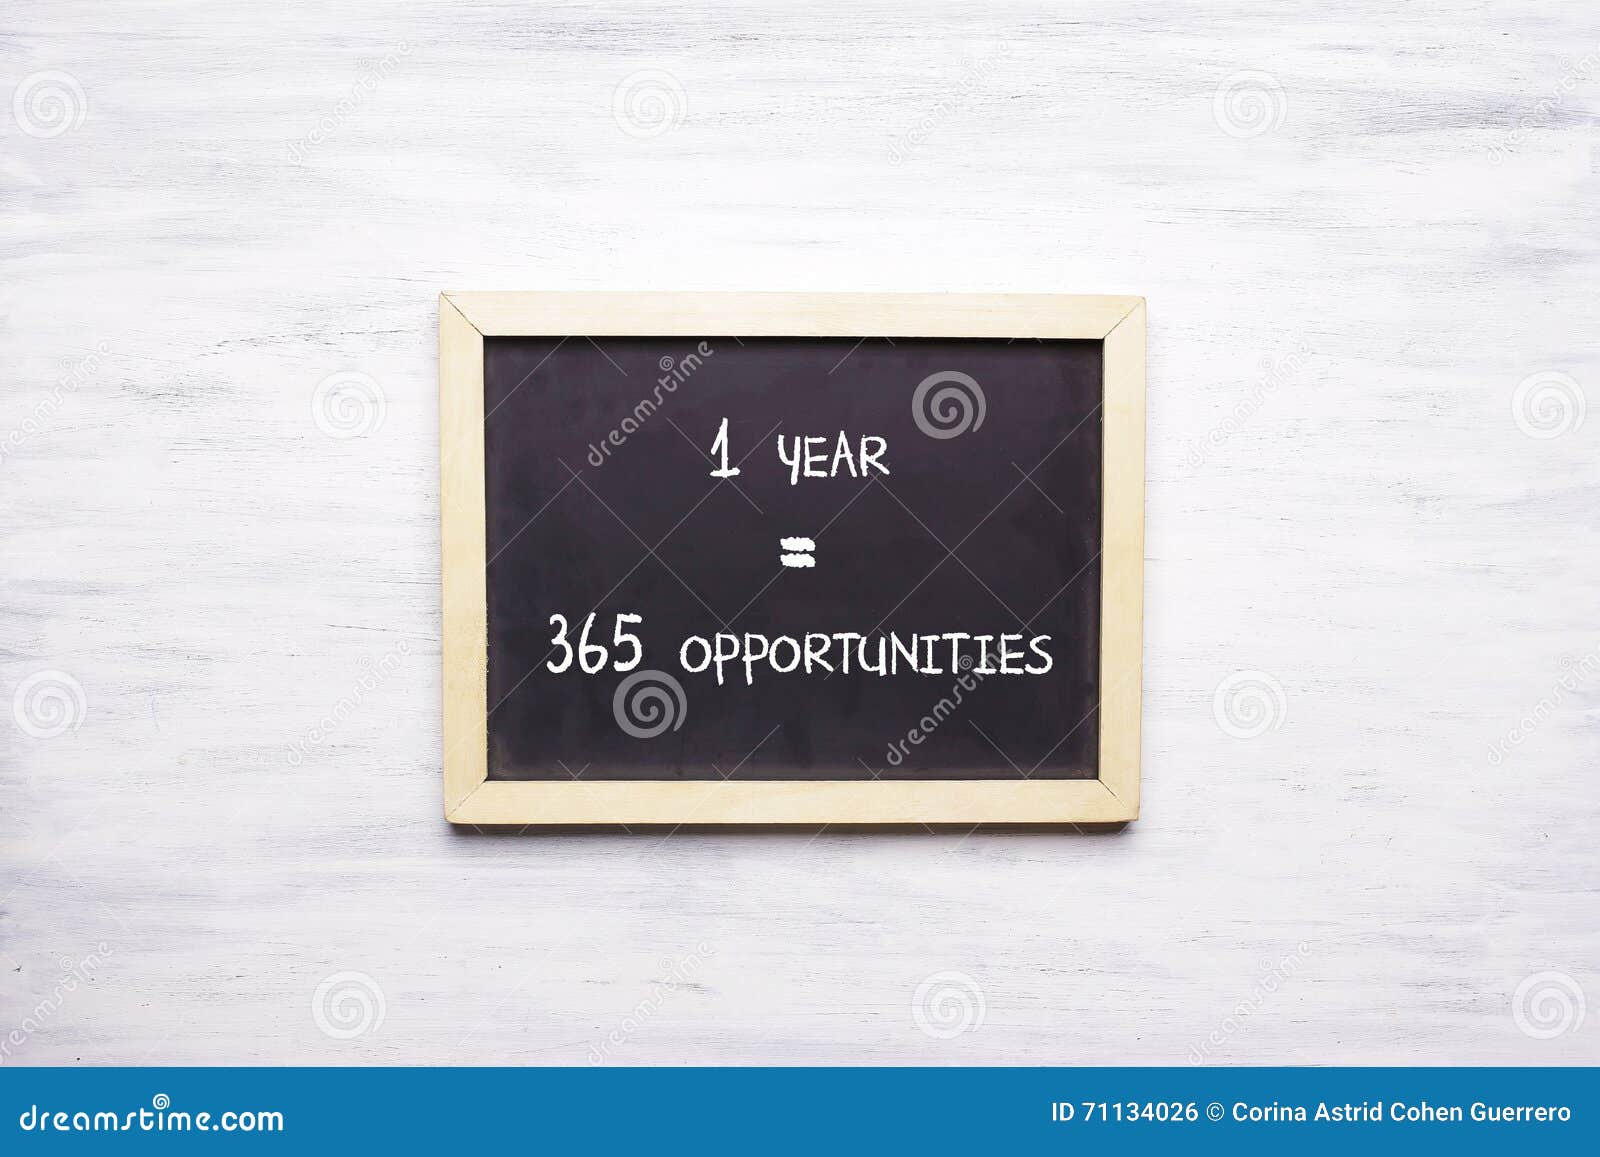 1 Year 365 Opportunities Photos Free Royalty Free Stock Photos From Dreamstime